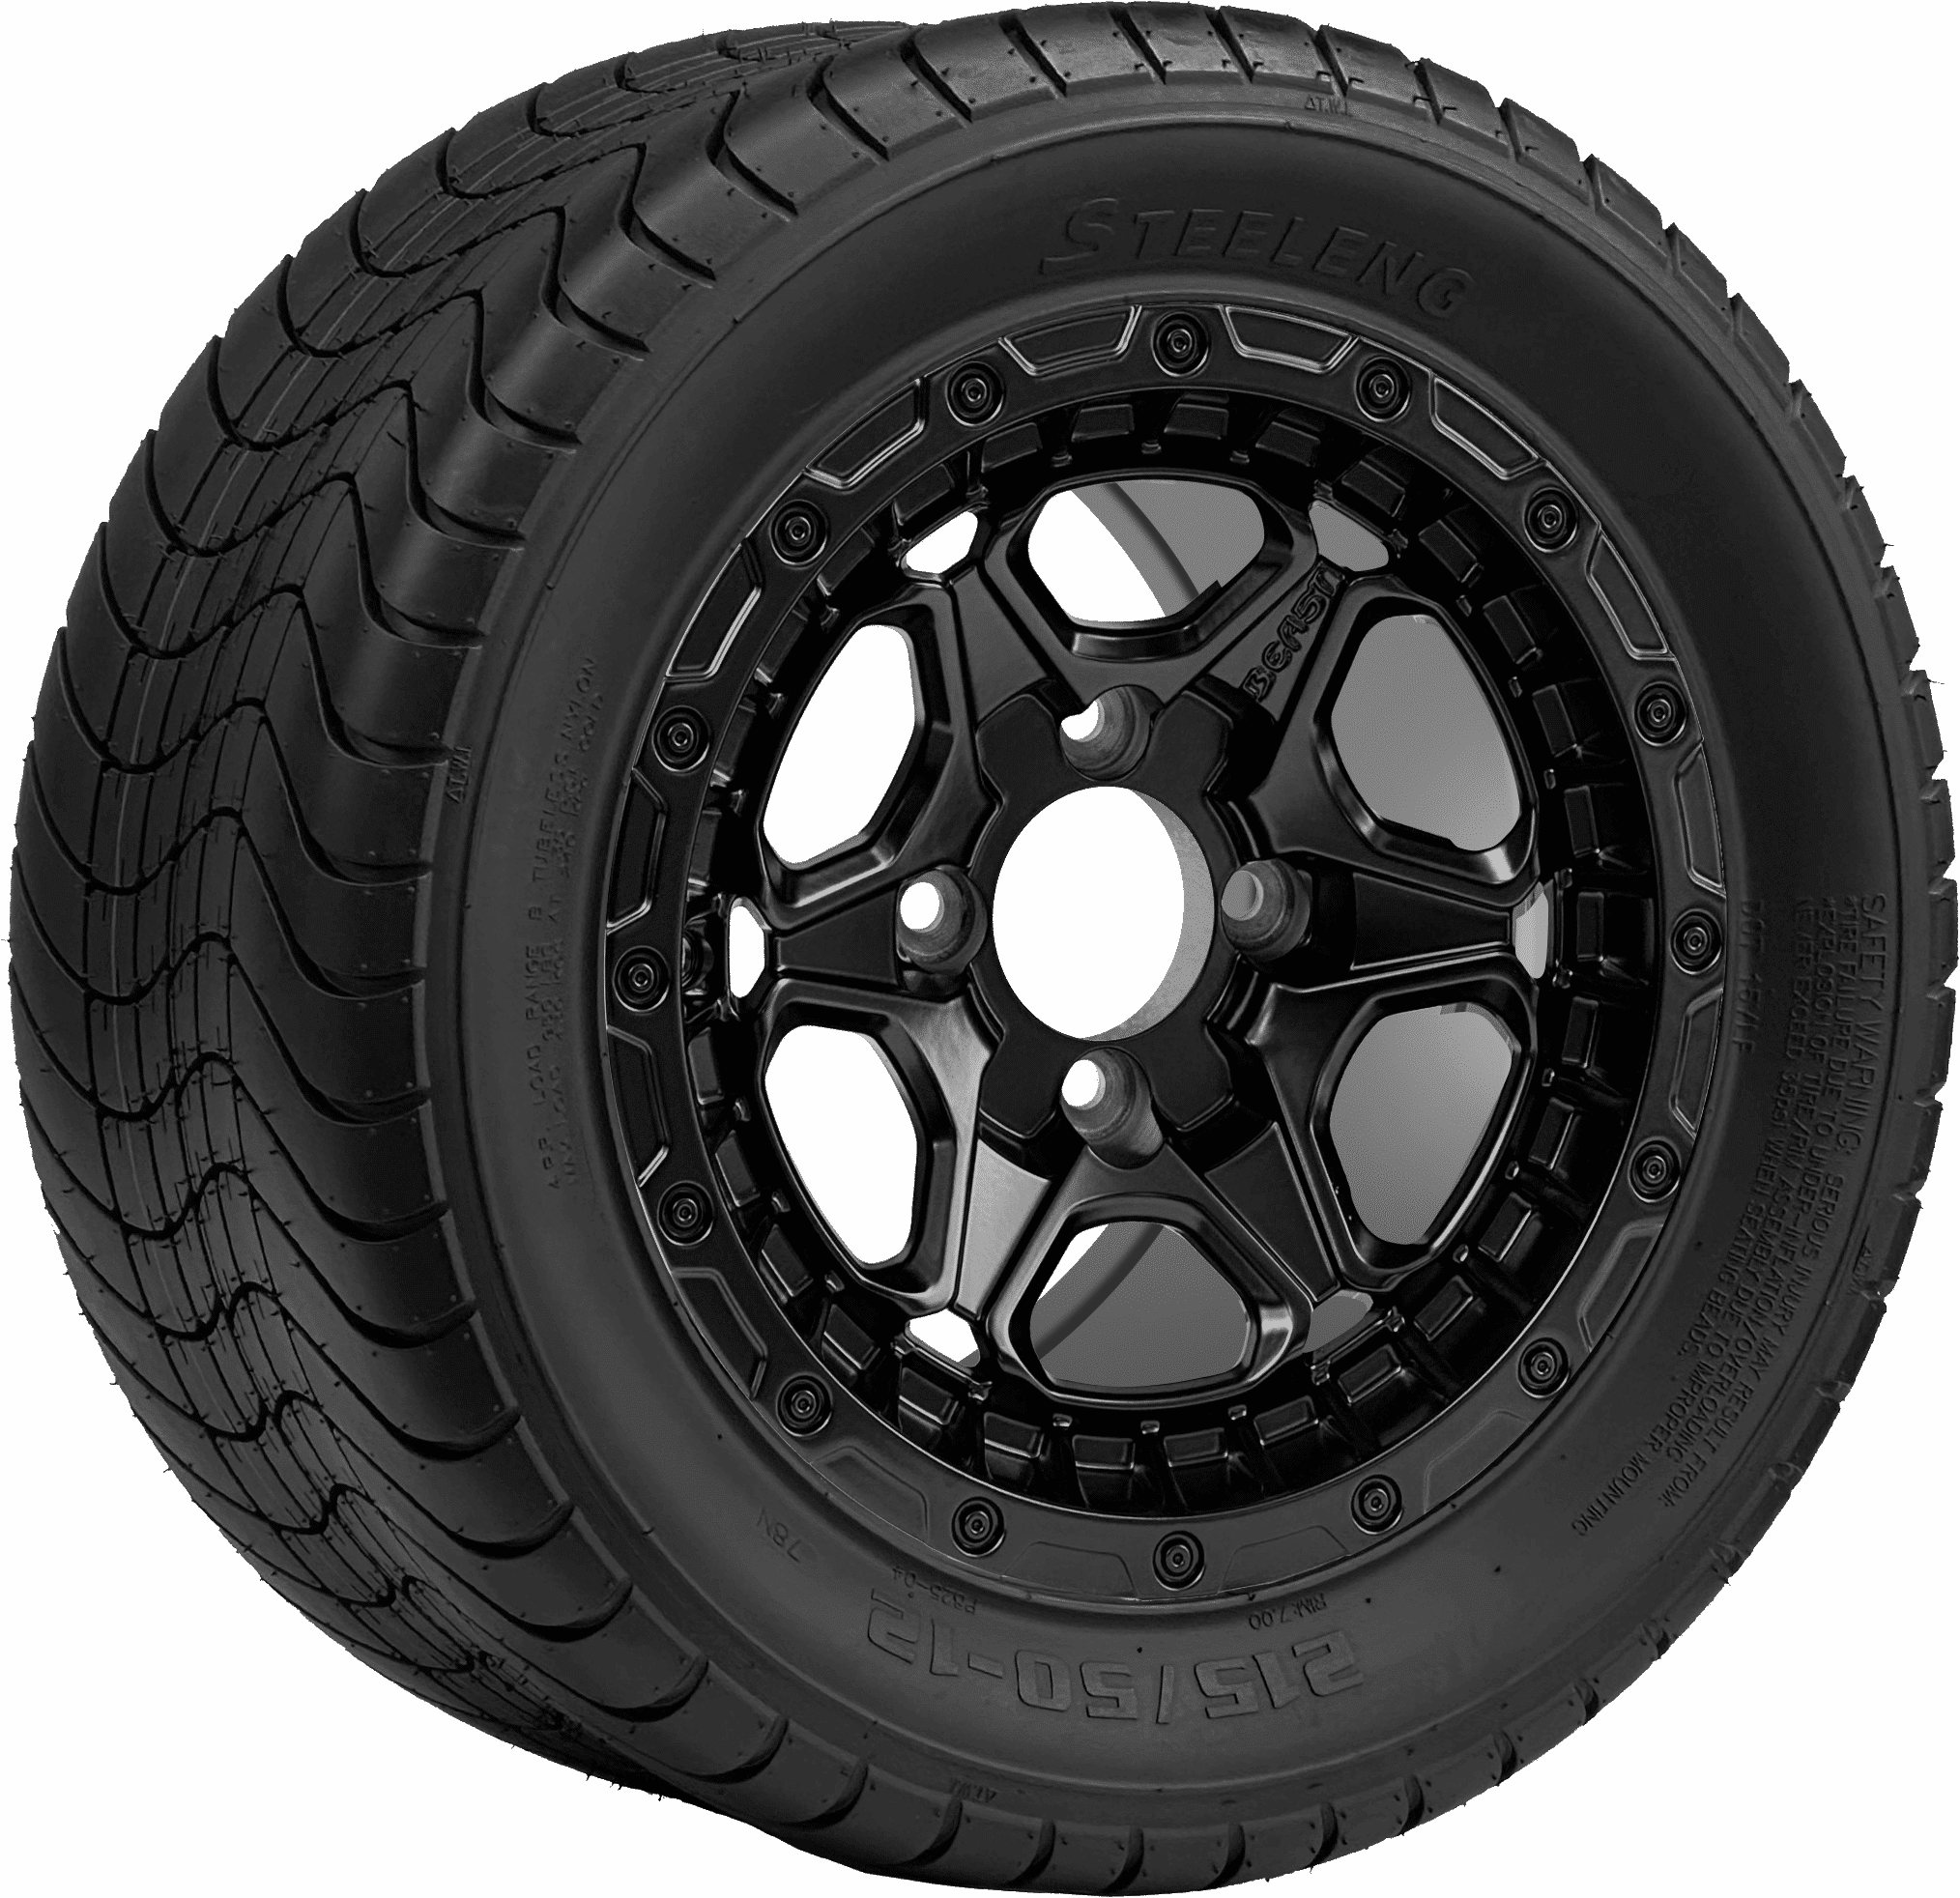 BNDL-TR1213-WH1265-CC0024-LN0006 12″ GRIZZLY MATTE BLACK WHEEL – ALUMINUM ALLOY / STEELENG 215/50-12 COMFORT RIDE STREET TIRE DOT APPROVED